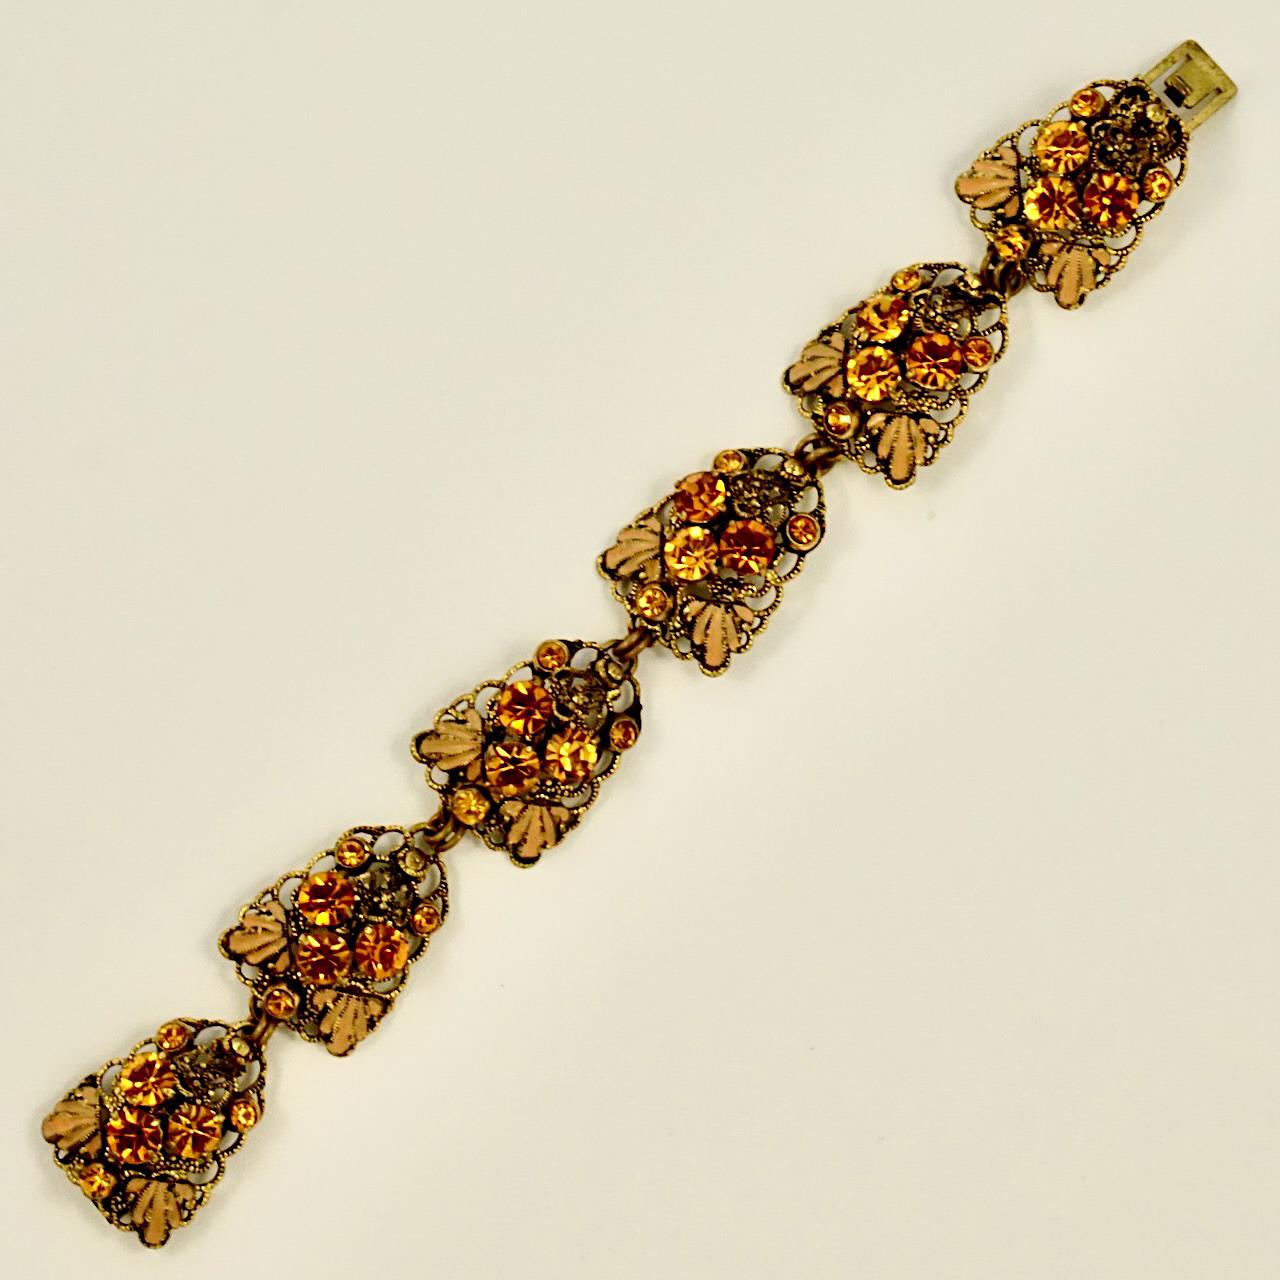 Beautiful gold plated filigree earrings and bracelet set, featuring citrine rhinestones. The pieces are finished with caramel and black enamel. The bracelet is length 19 cm / 7.4 inches by width 2 cm / .78 inch. The earrings are length 5.5 cm / 2.1